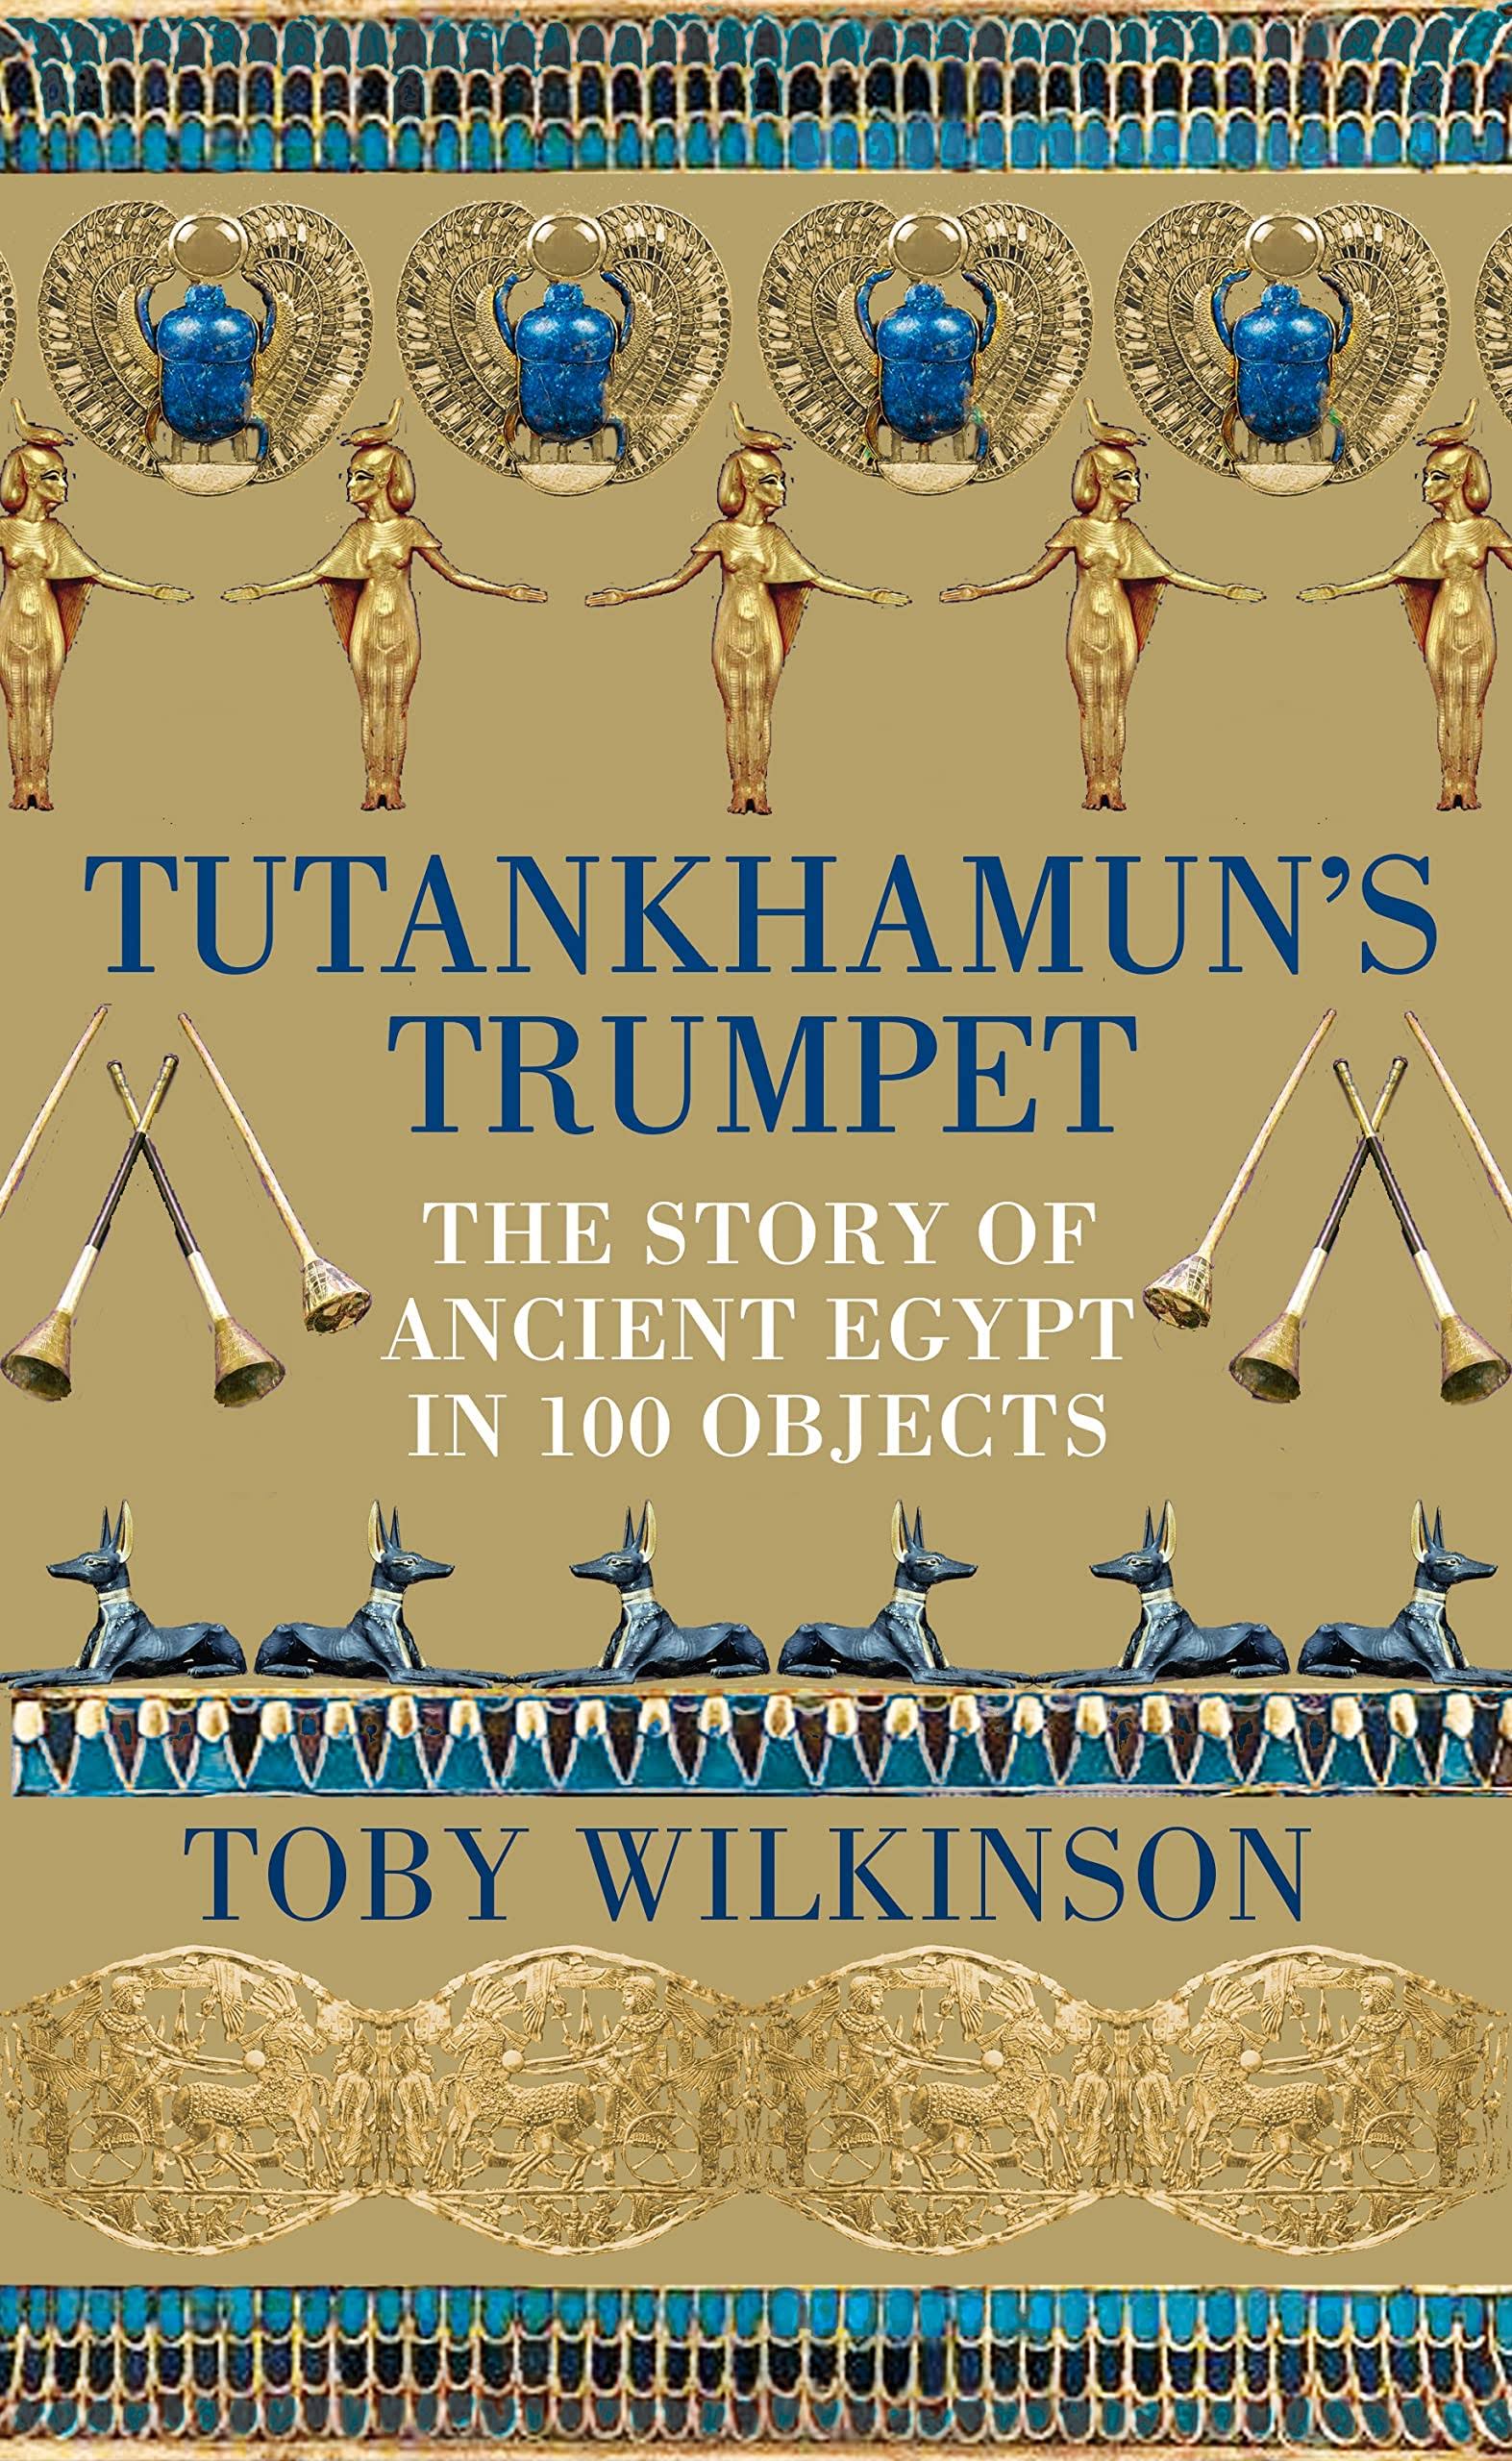 Tutankhamun's Trumpet: The Story of Ancient Egypt in 100 Objects [Book]